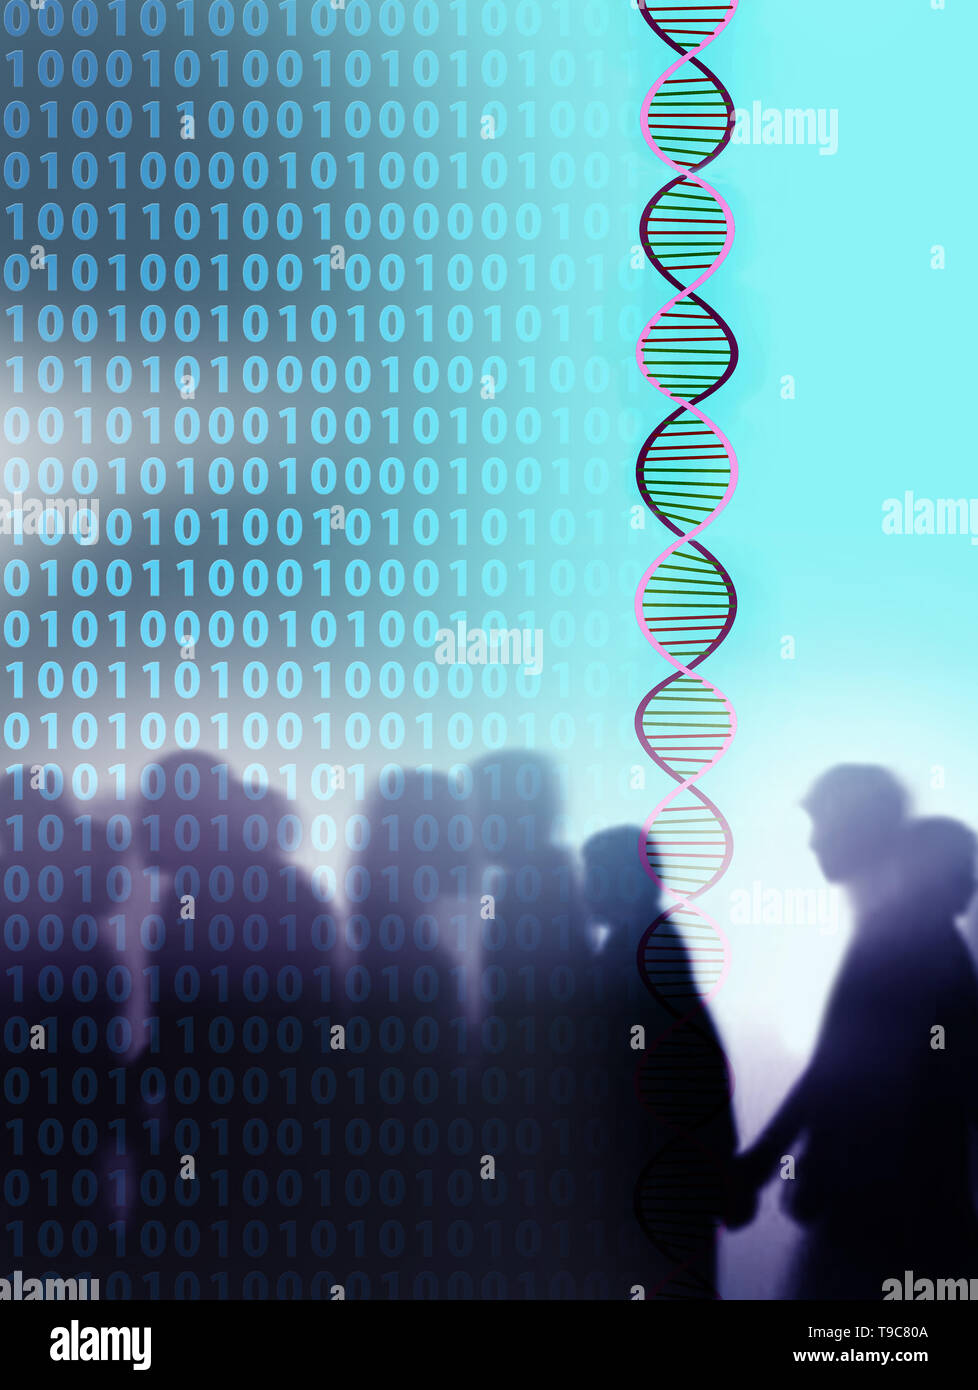 concept image of people shadows against binary code and D.N.A, Stock Photo